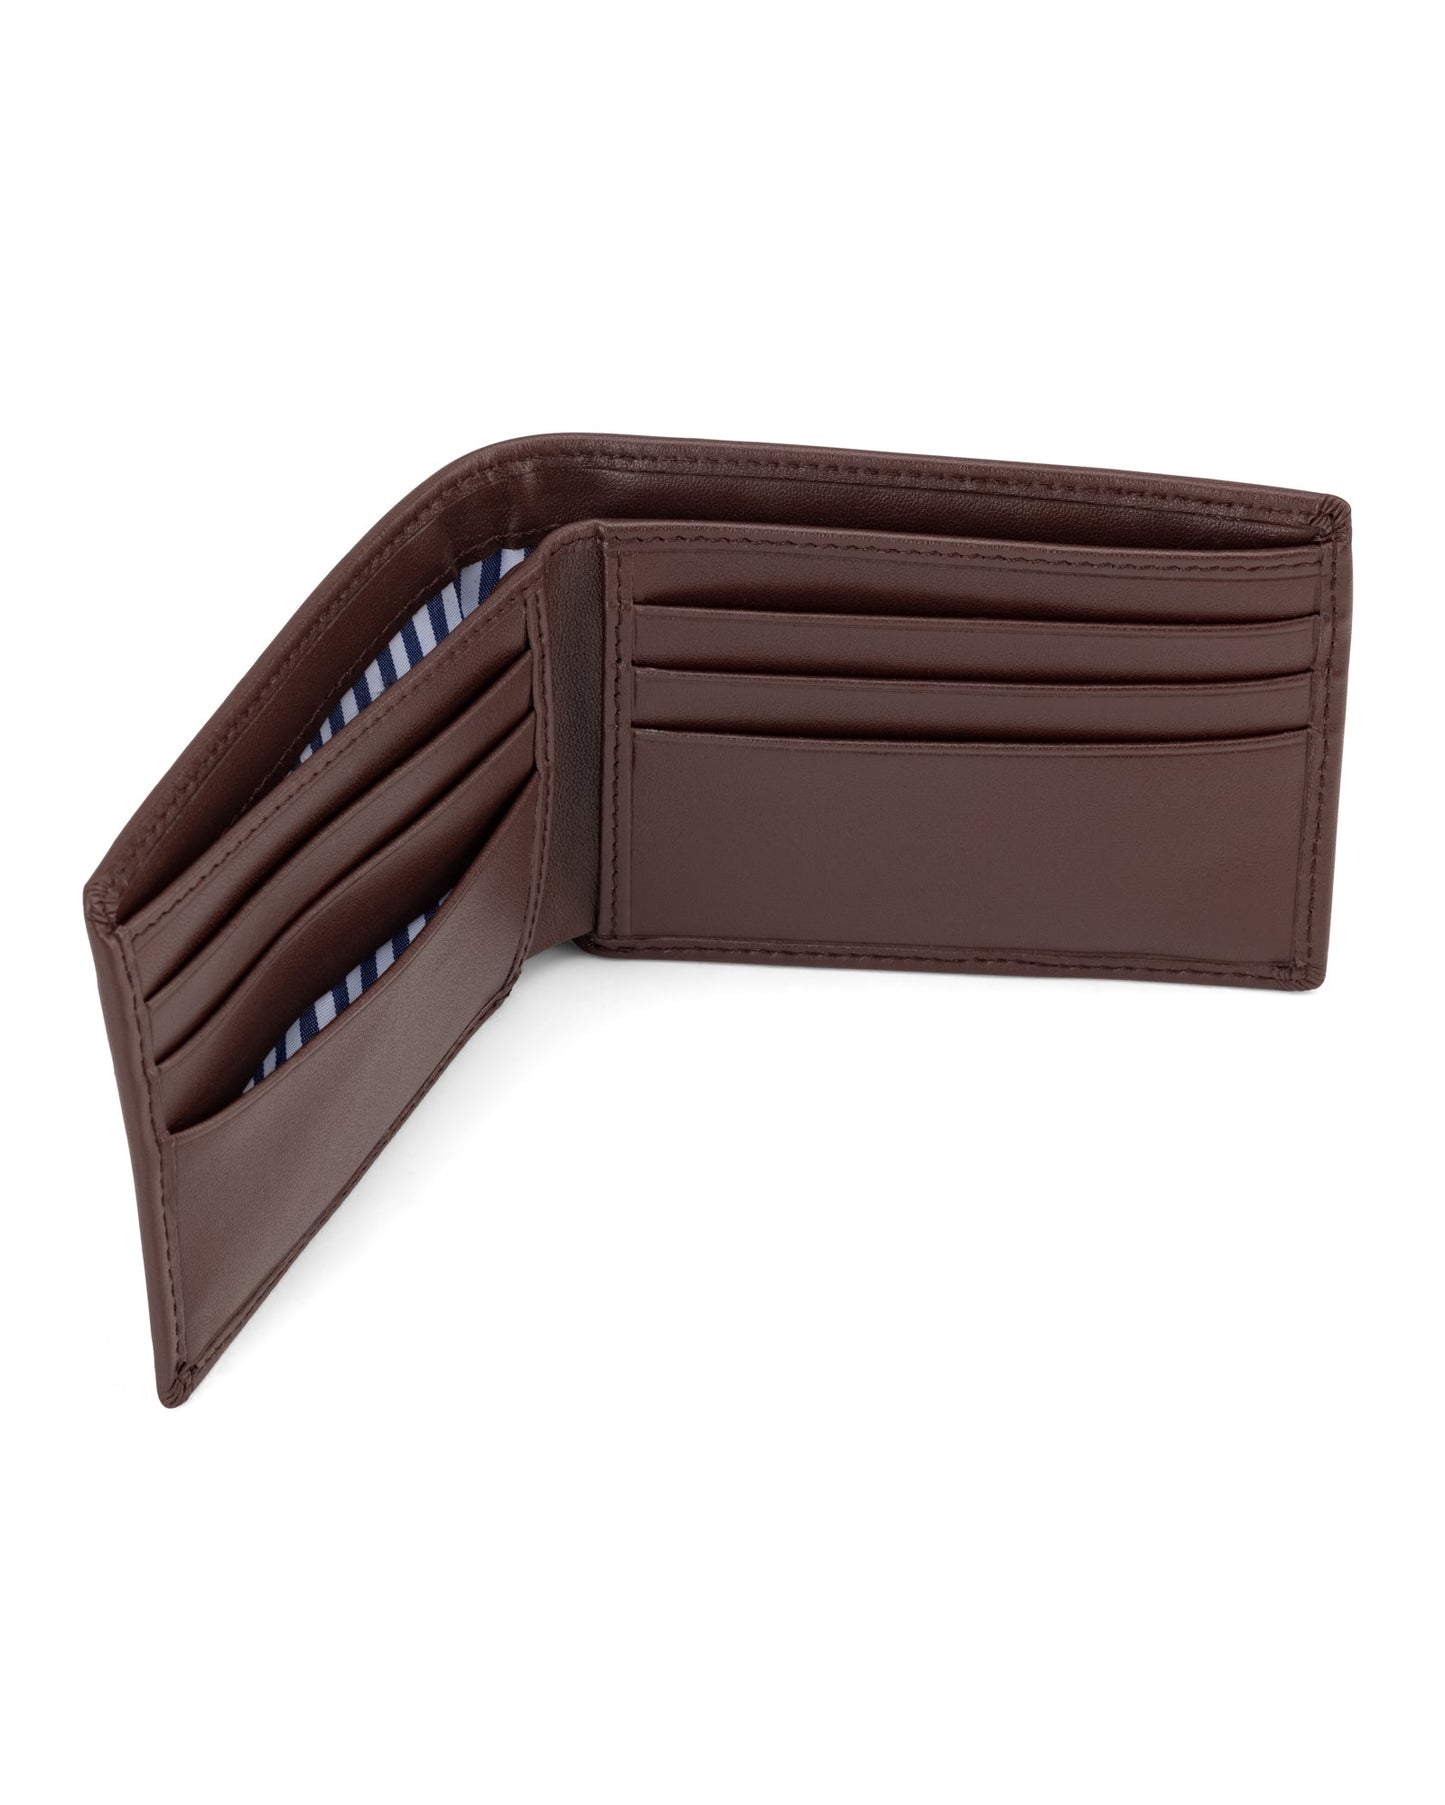 Leather Wallet Ortc